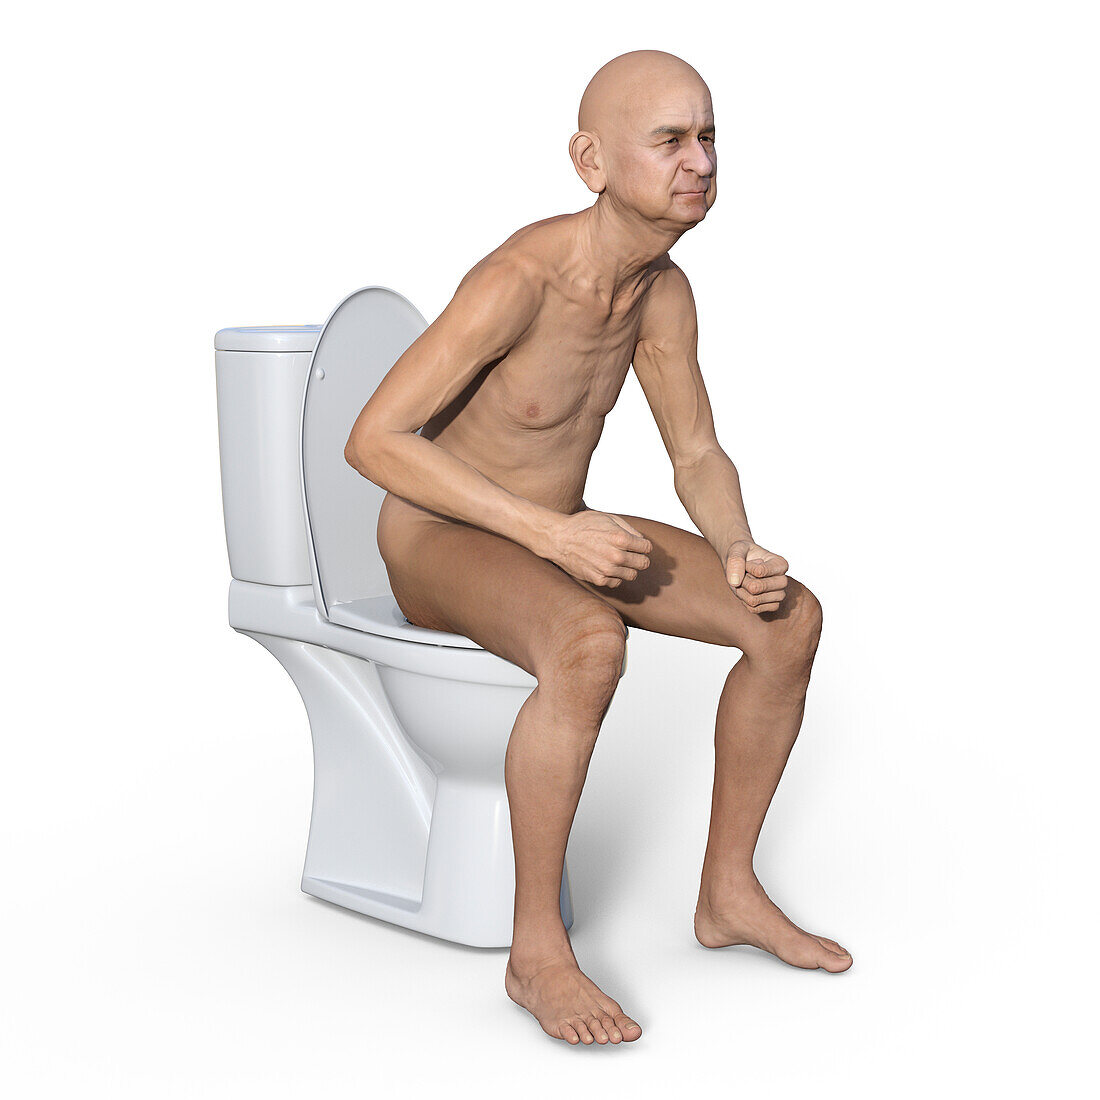 Senior person with constipation, illustration